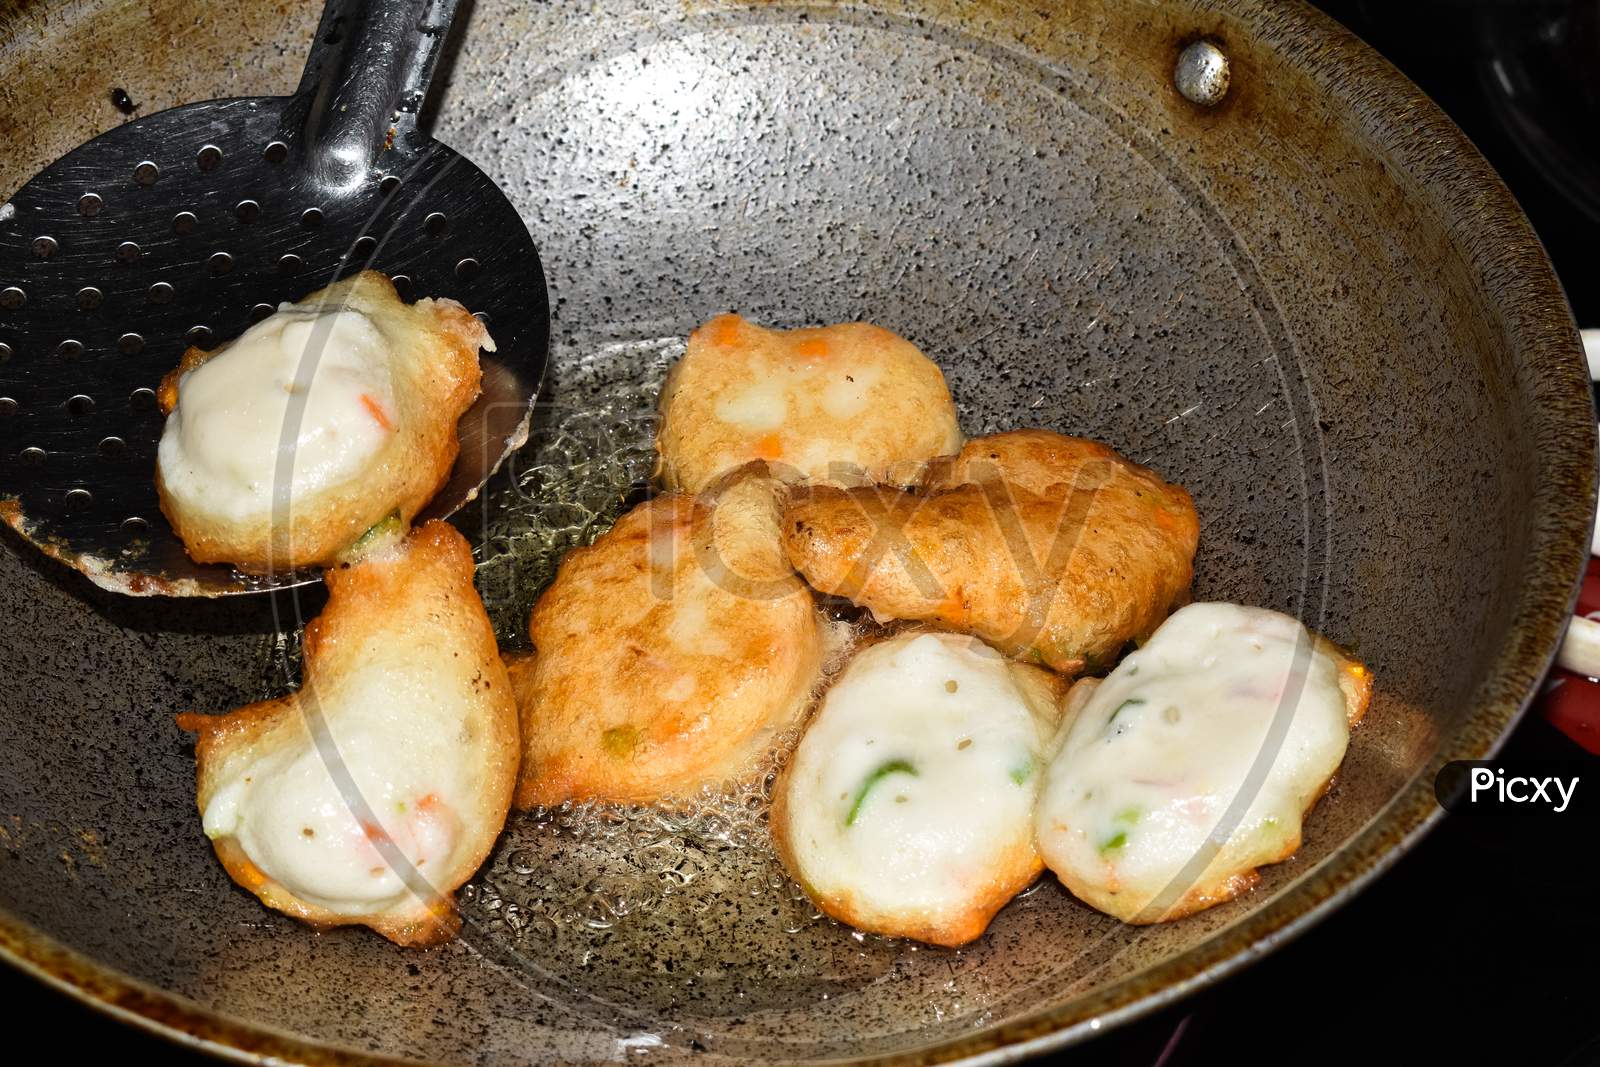 South Indian Cuisine - Vada Or Medu Vadai Frying In Coconut Oil. Very Popular South Indian Snack.